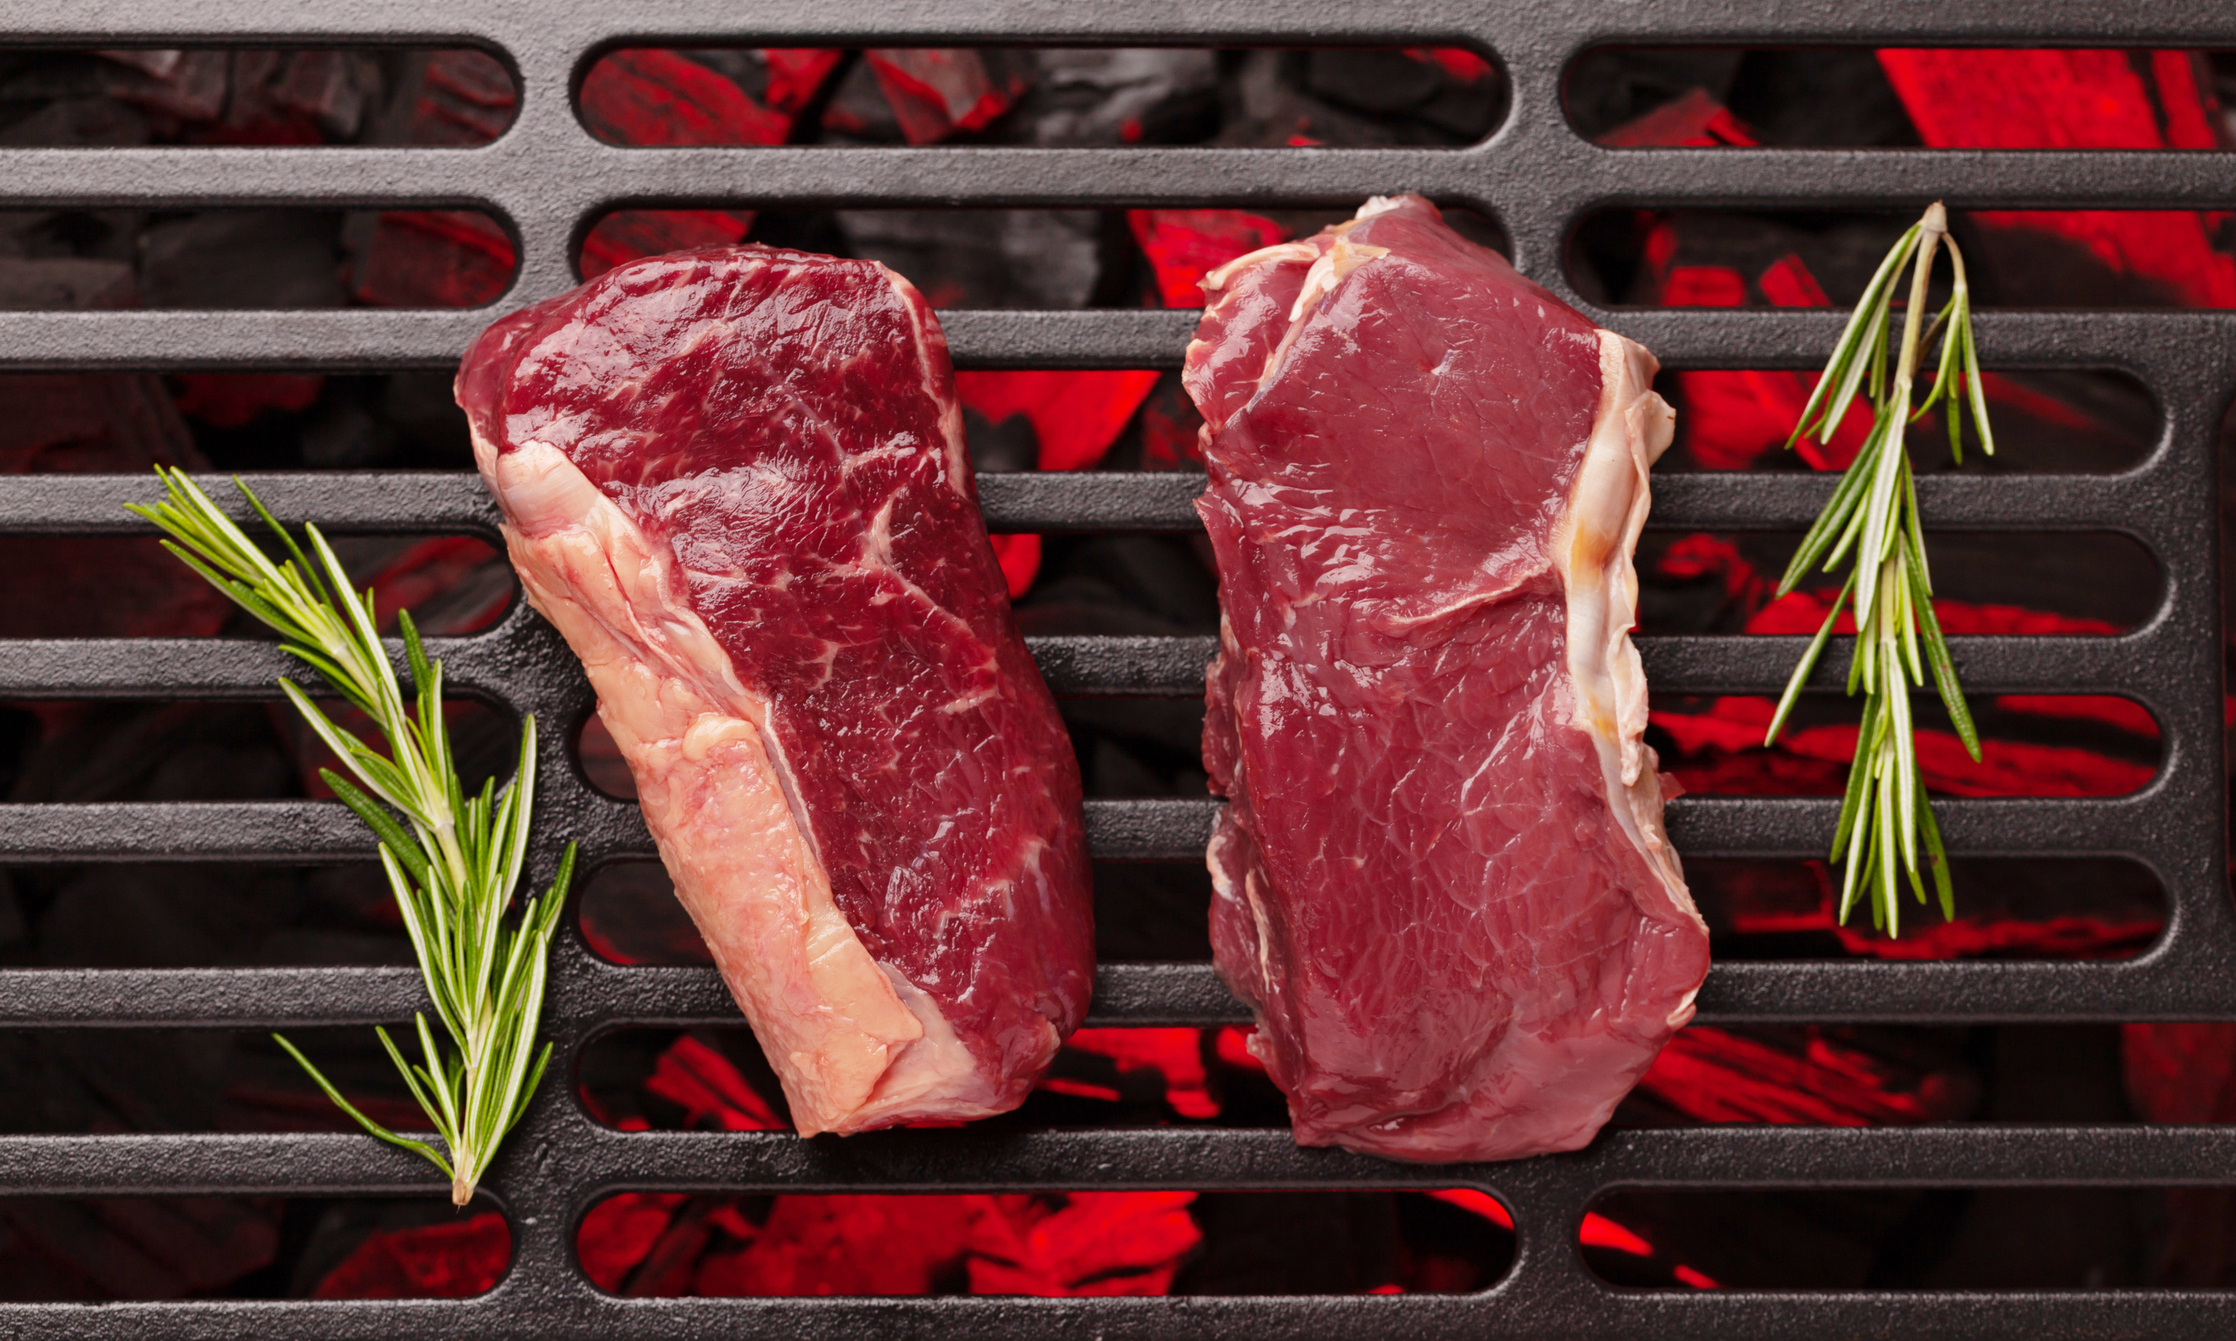 Keep this red meat compound from aging your arteries and brain